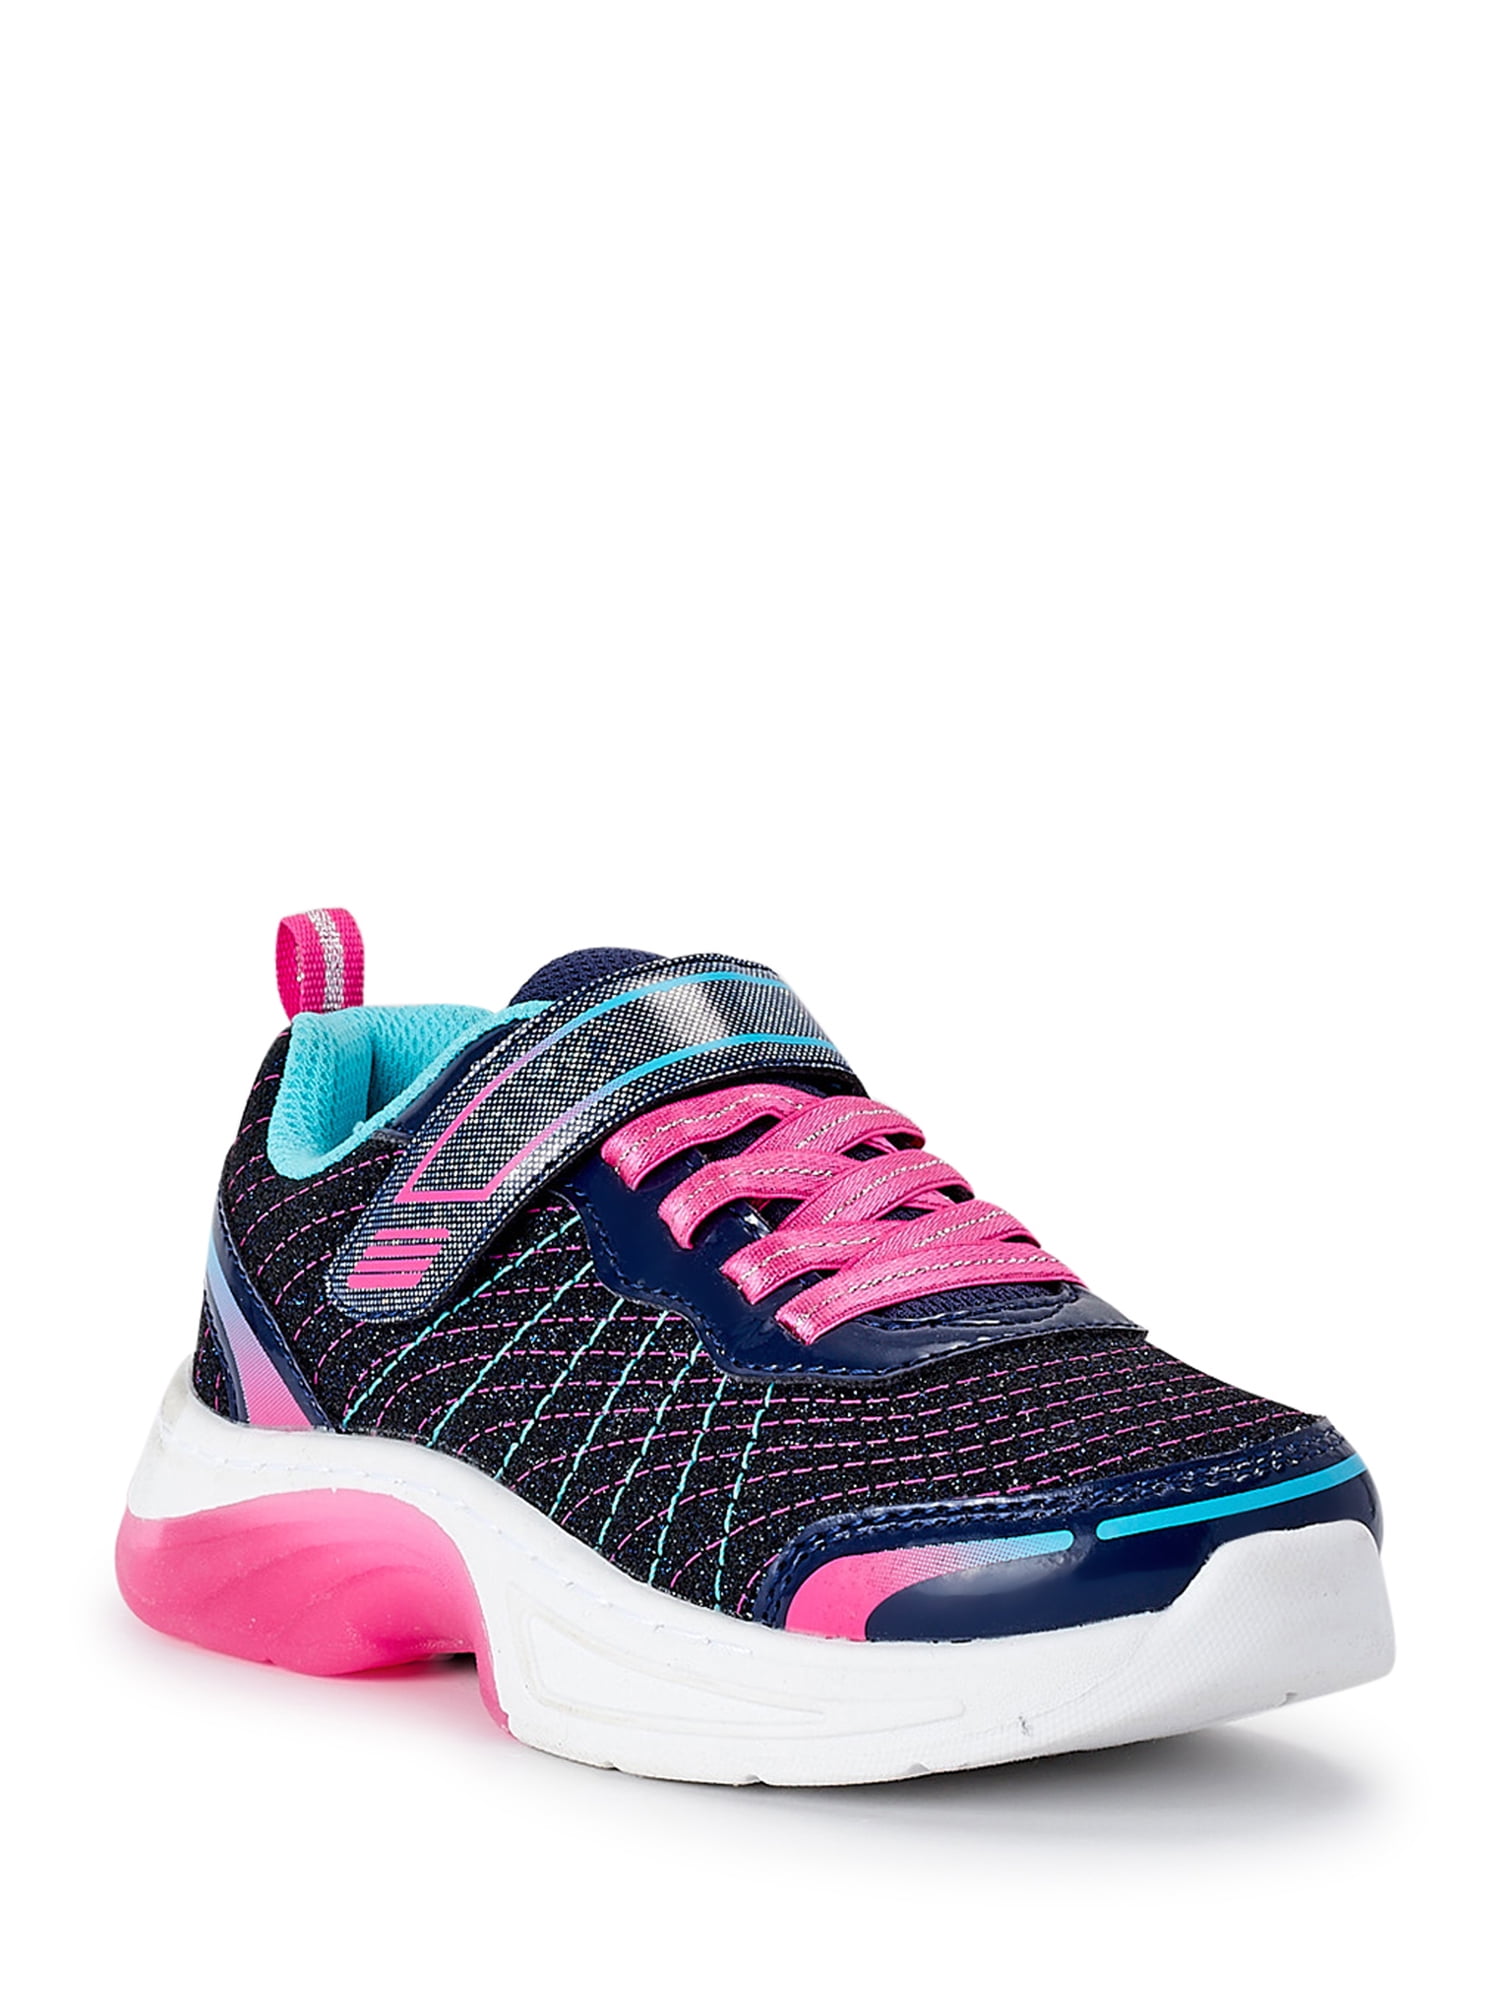 Athletic Works Toddler Girls Low Top Light Up Sneakers, Sizes 7-12